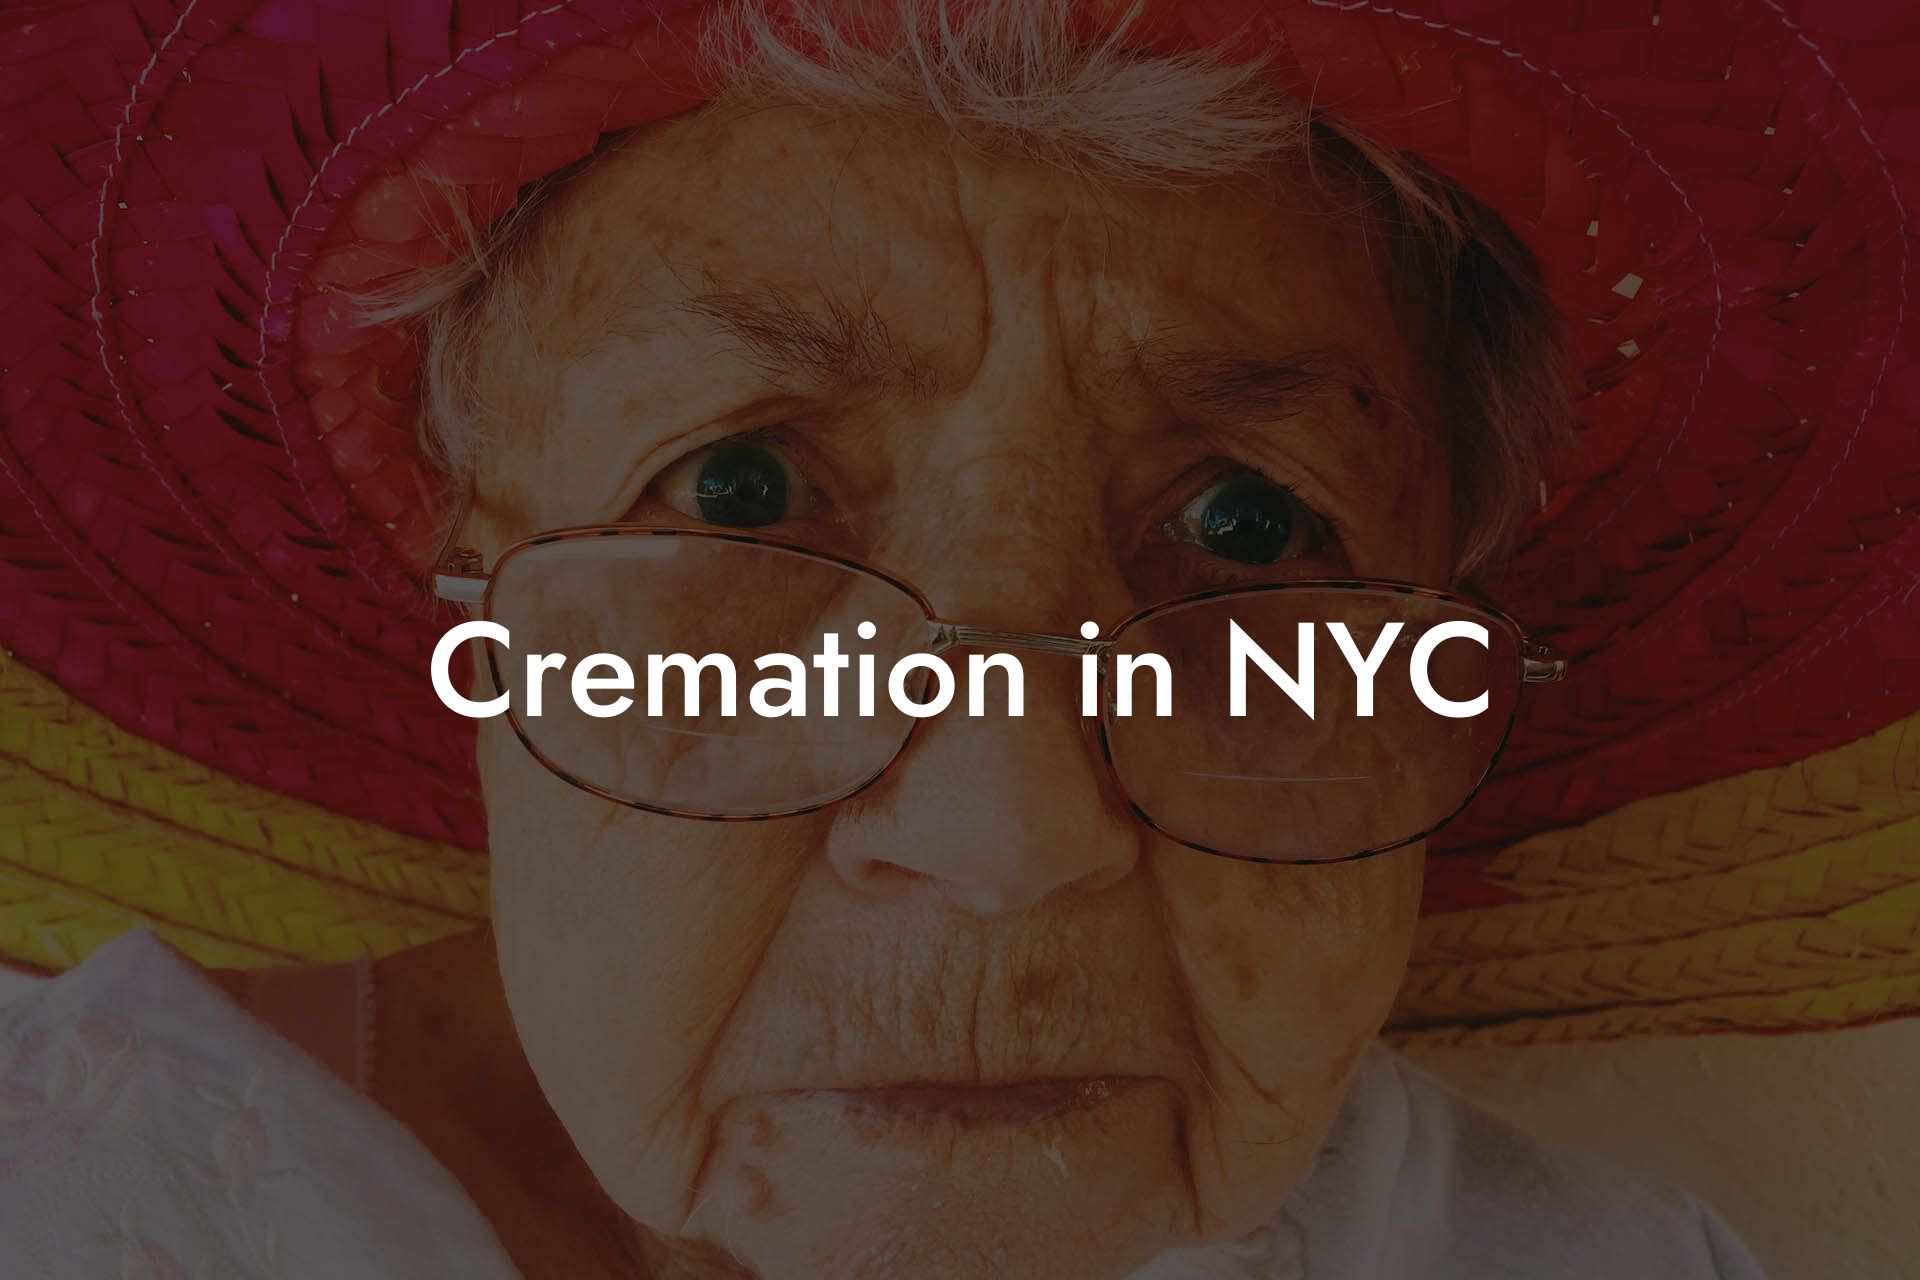 Cremation in NYC